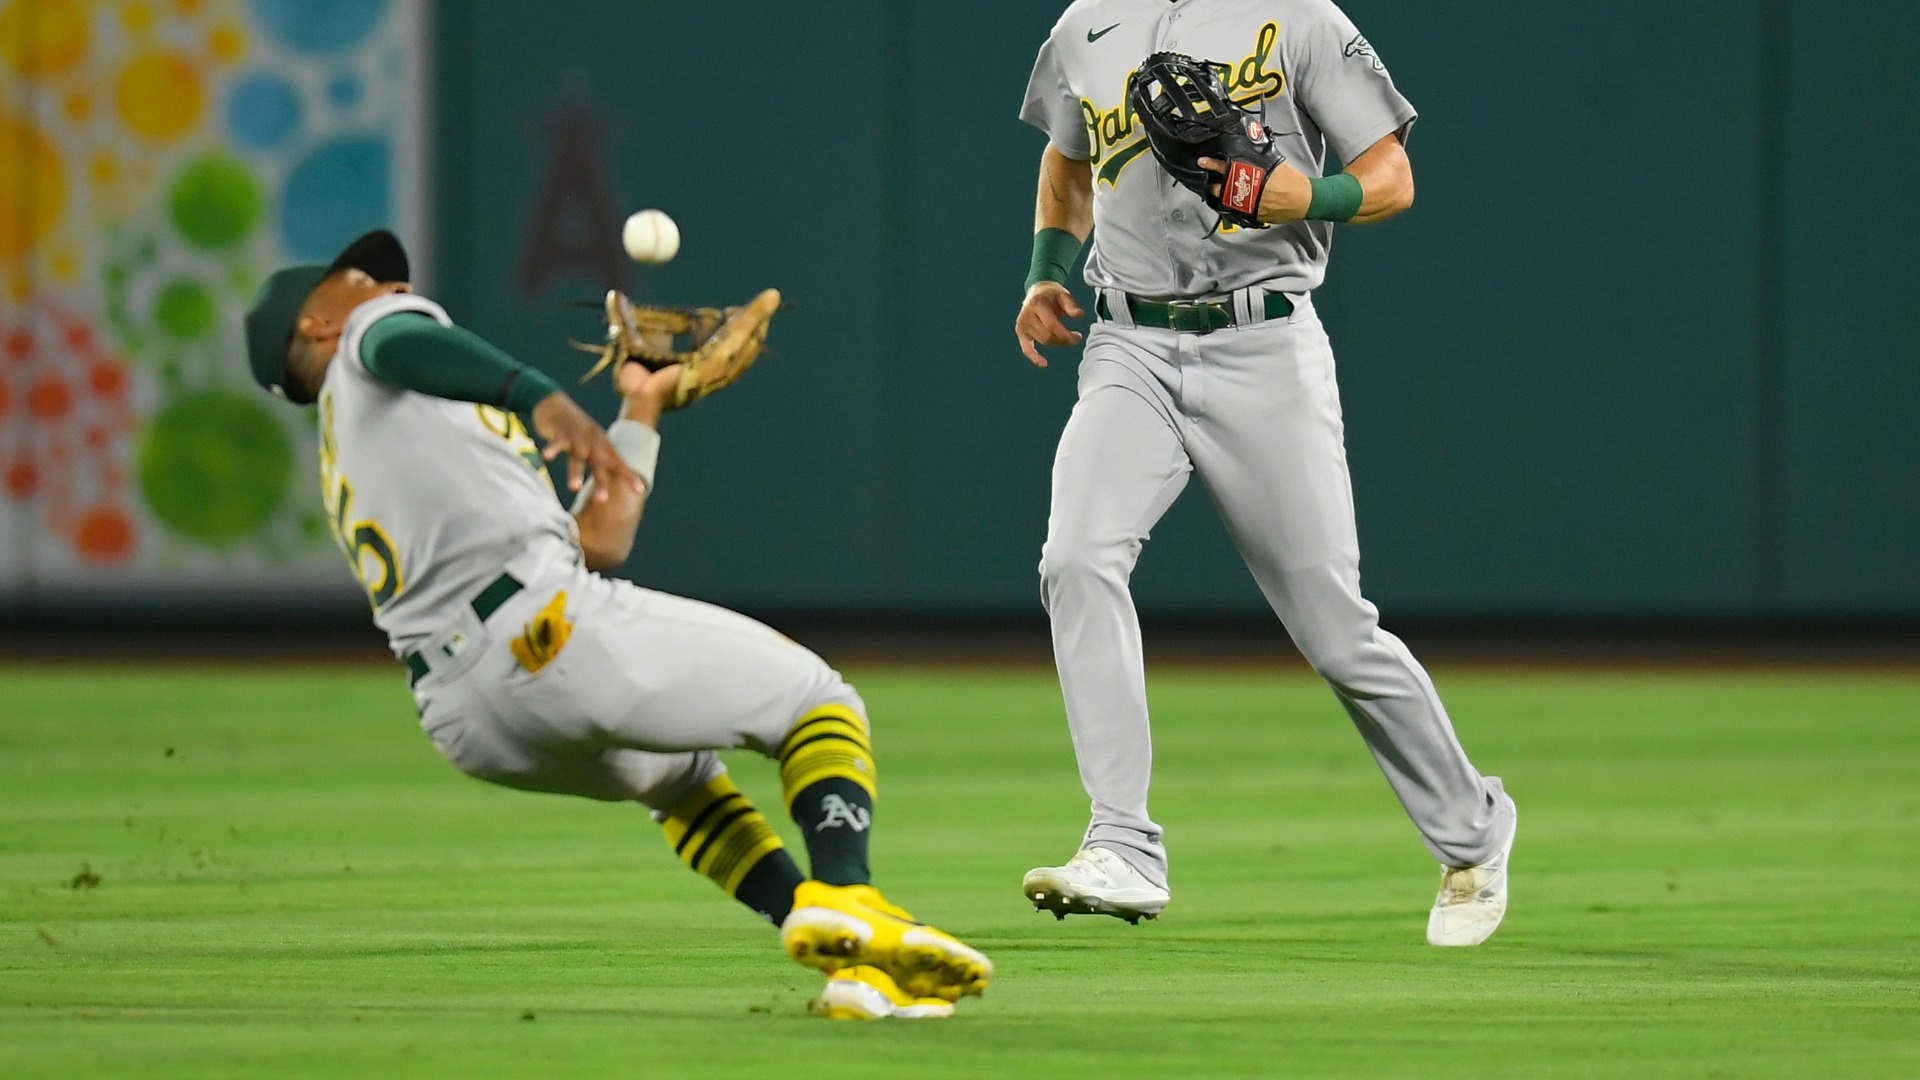 Tony Kemp surprised himself with unreal acrobatic catch in Athletics' loss  – NBC Sports Bay Area & California